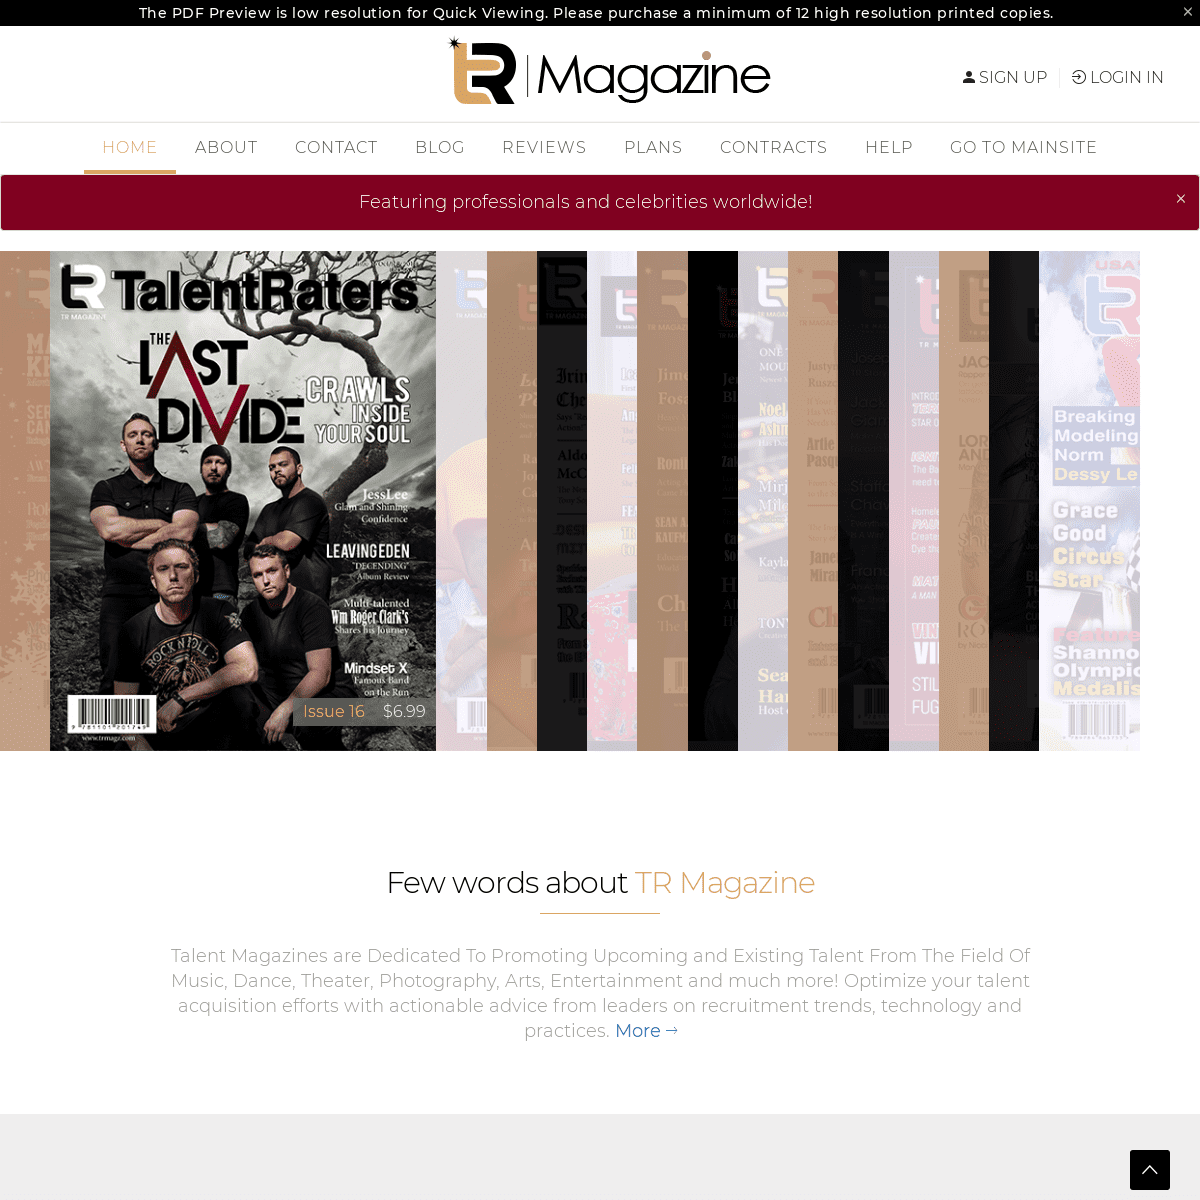 A complete backup of trmagz.com